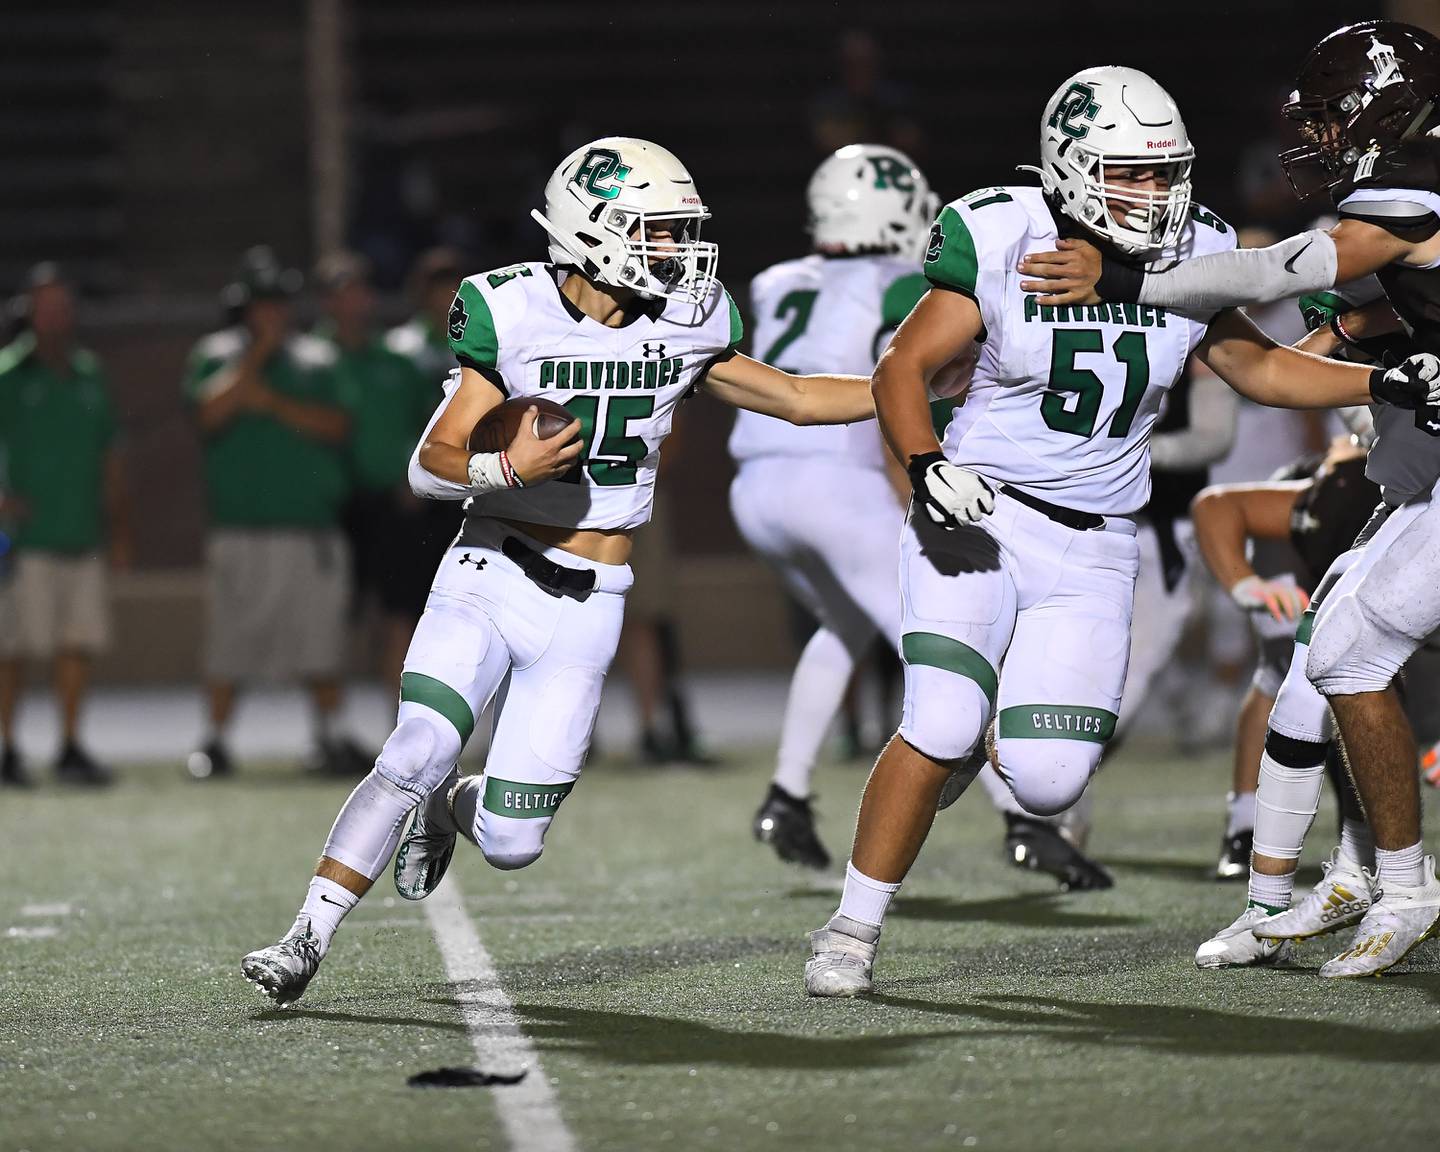 Providence Catholic's Ethan Litynski in action on Friday, Sep.  17, 2021, at Joliet Memorial Stadium in Joilet, IL.